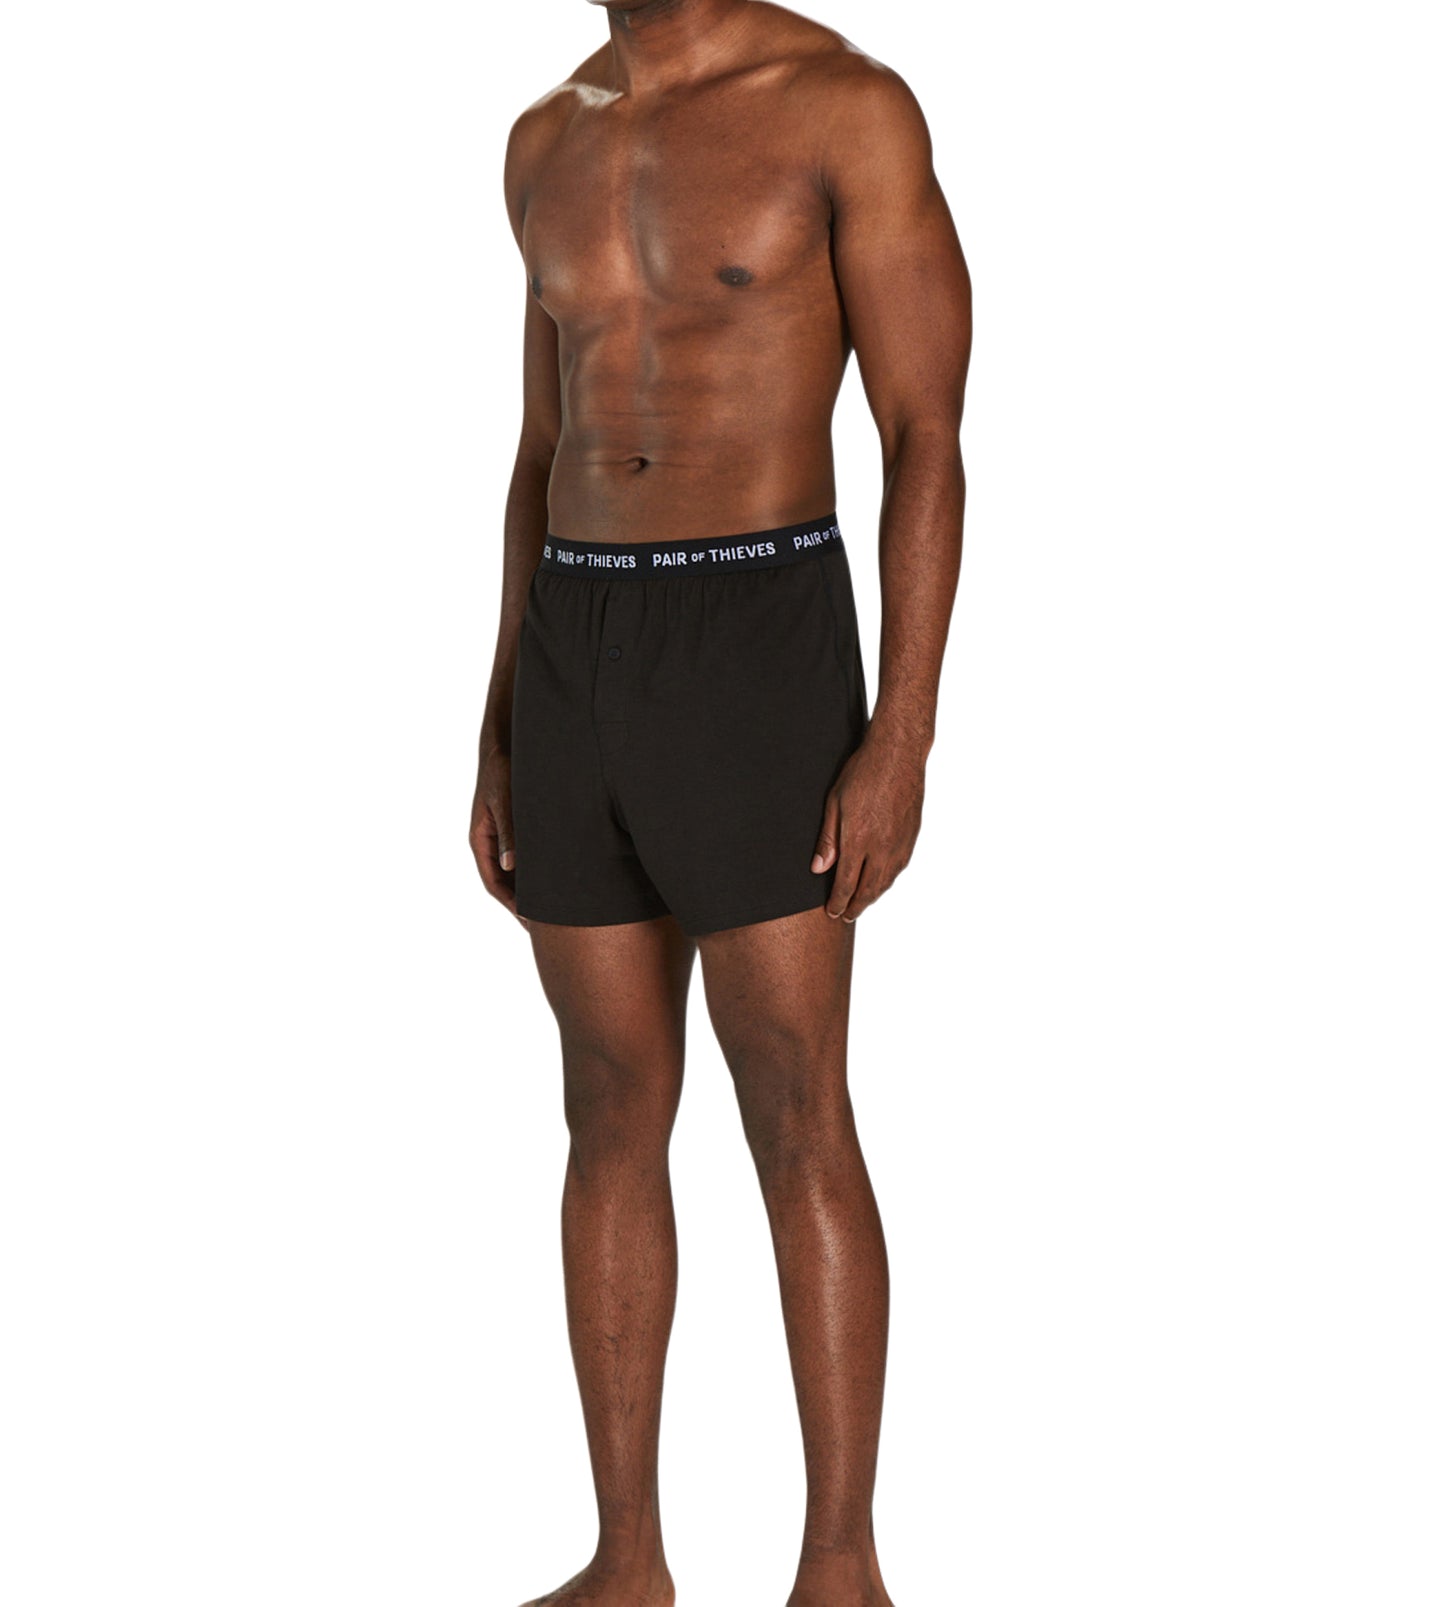 SuperSoft Boxers 2 Pack colors consists of Dark slate gray, Sienna, Black, Indian red, Saddle brown, Silver, Sienna, Saddle brown, Rosy brown